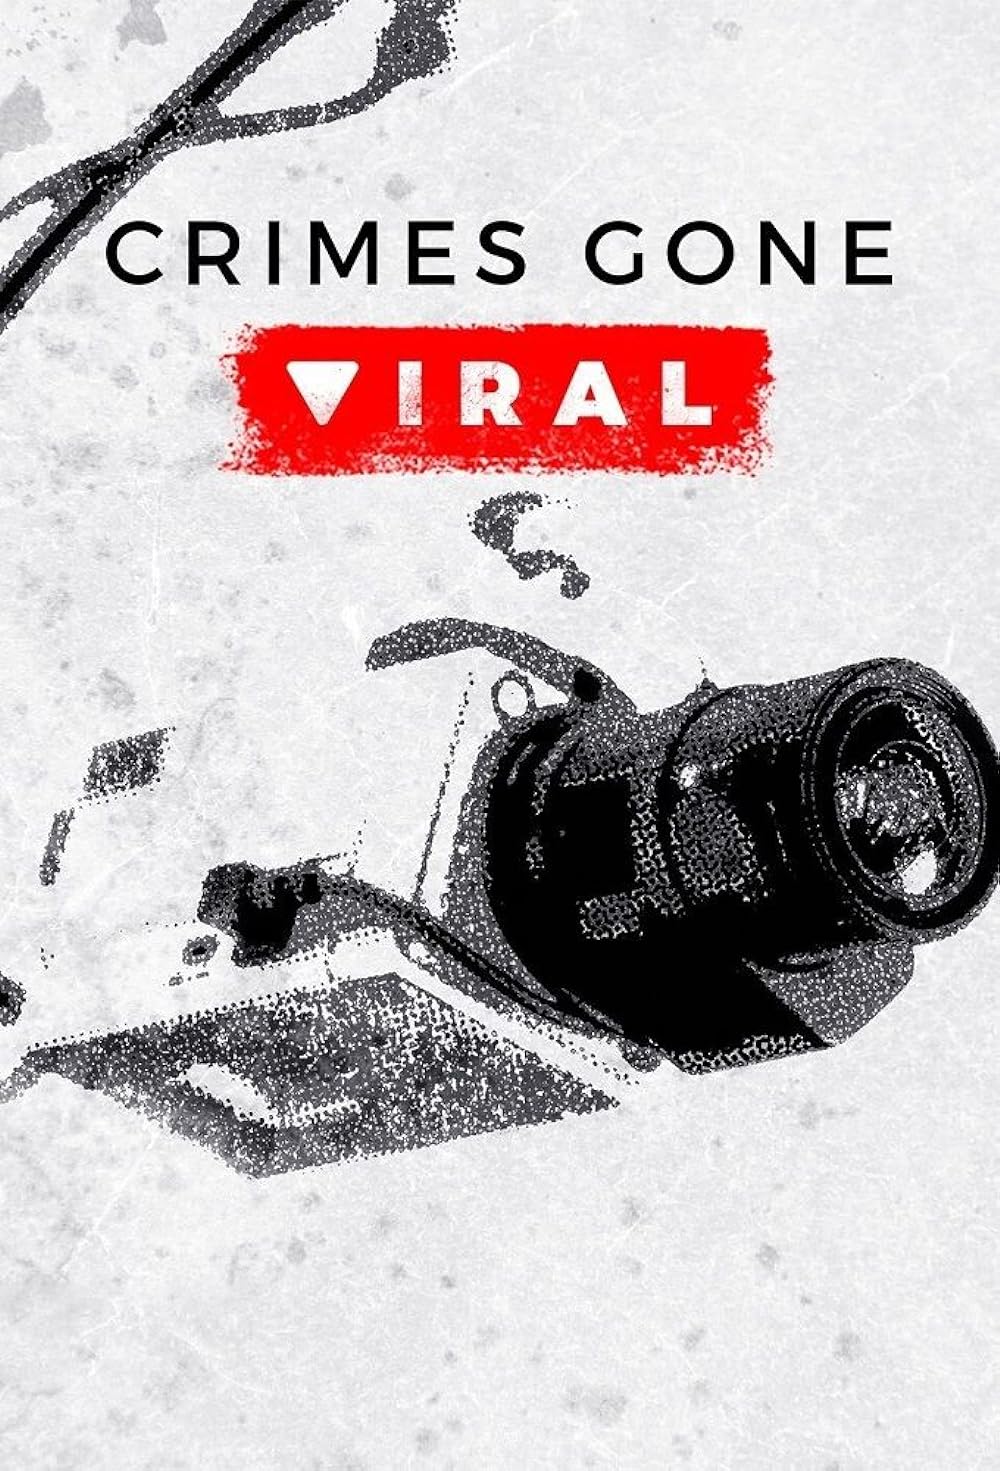 Gone Viral download the new version for android